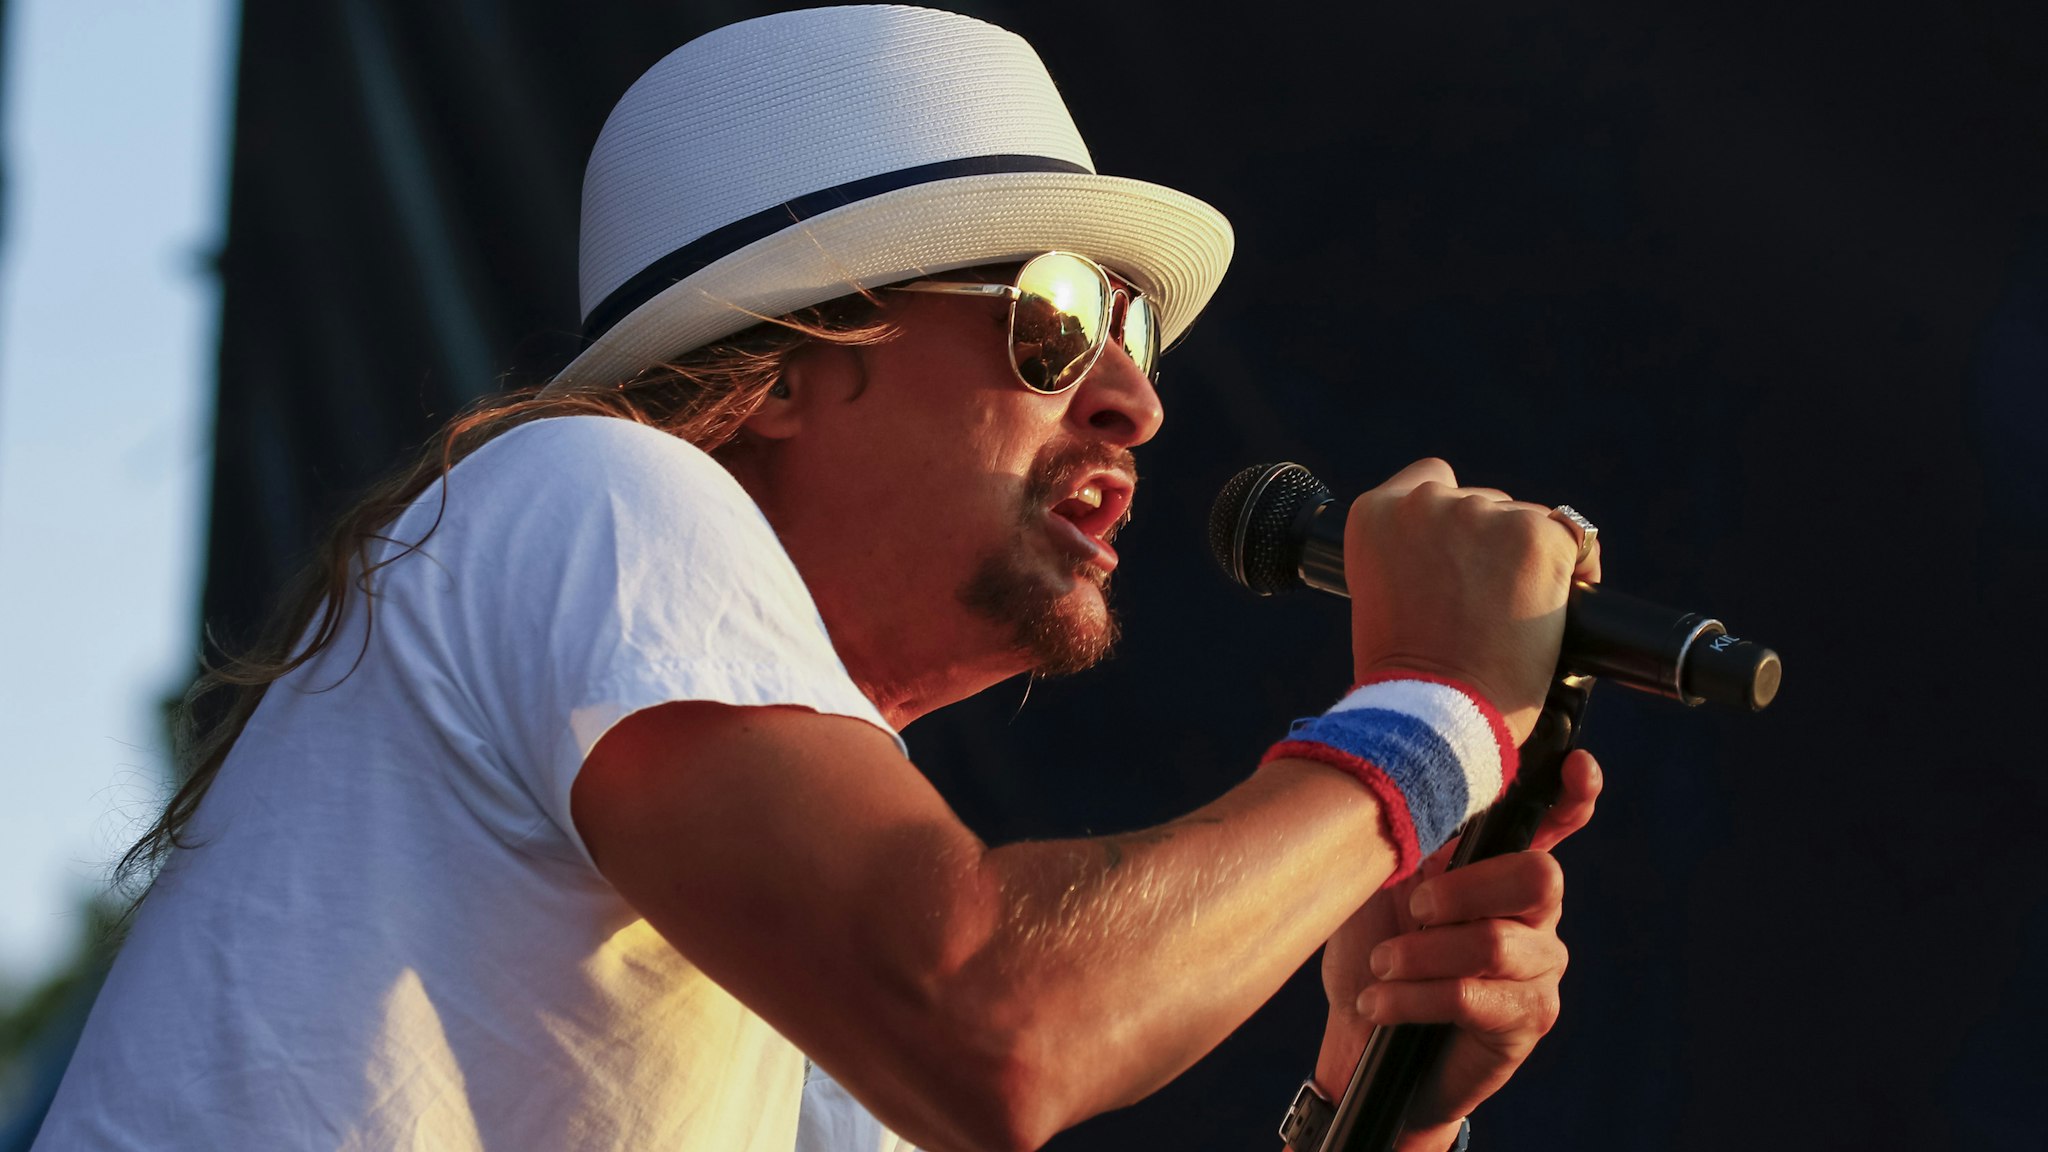 INDIANAPOLIS, IN - JUL 23: Kid Rock performs at the Indianapolis Motor Speedway on July 23, 2016 in Indianapolis, Indiana.